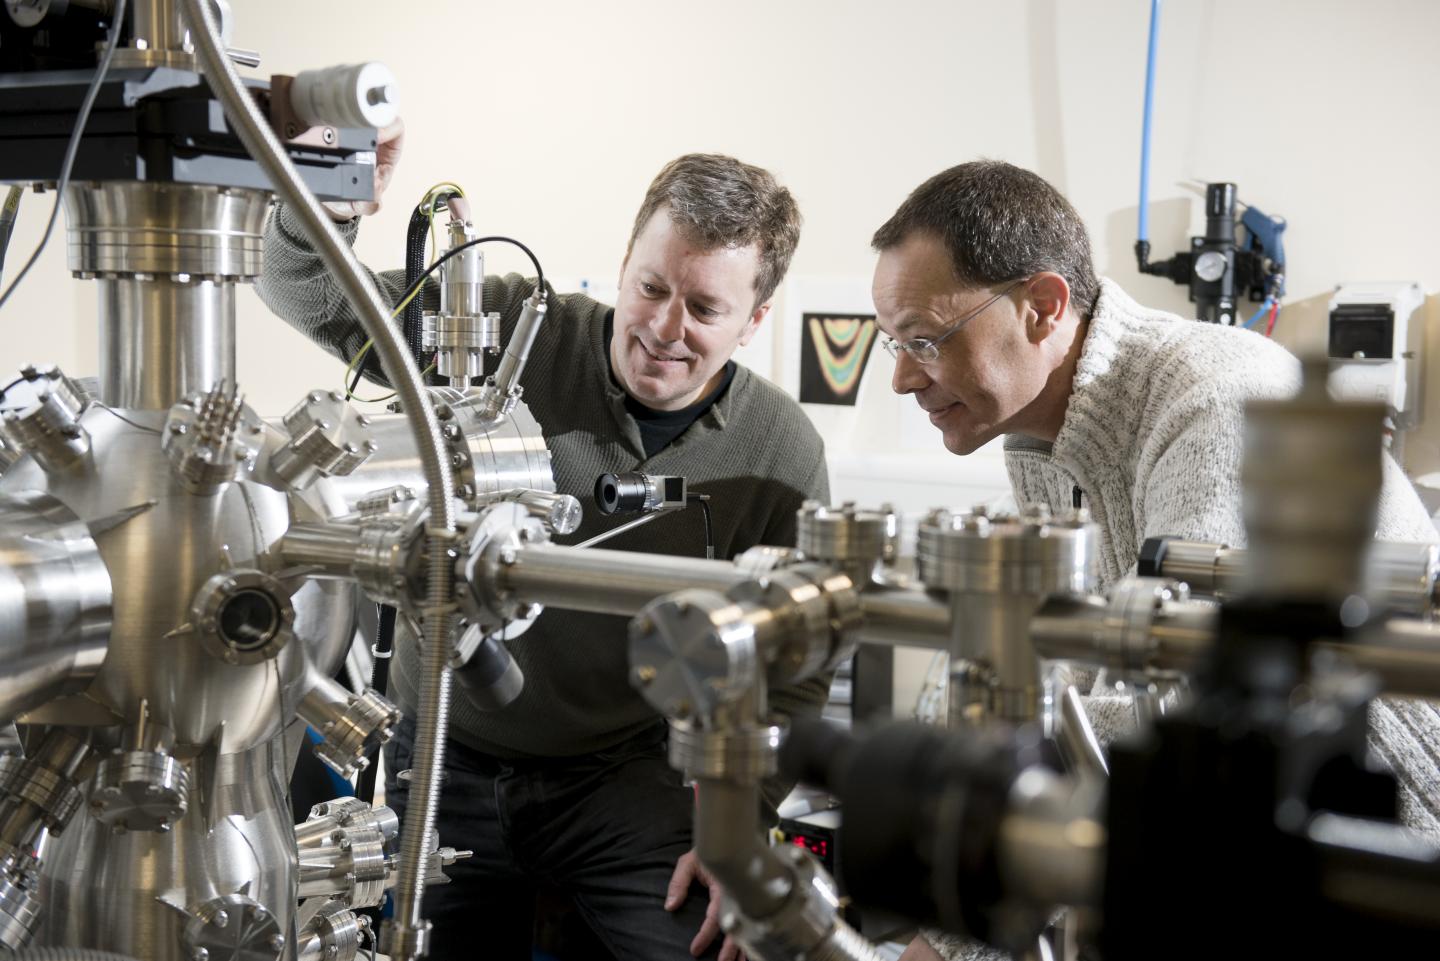 Dr. Gavin Bell and Dr. Yorck Ramachers in the laboratory. Source: University of Warwick